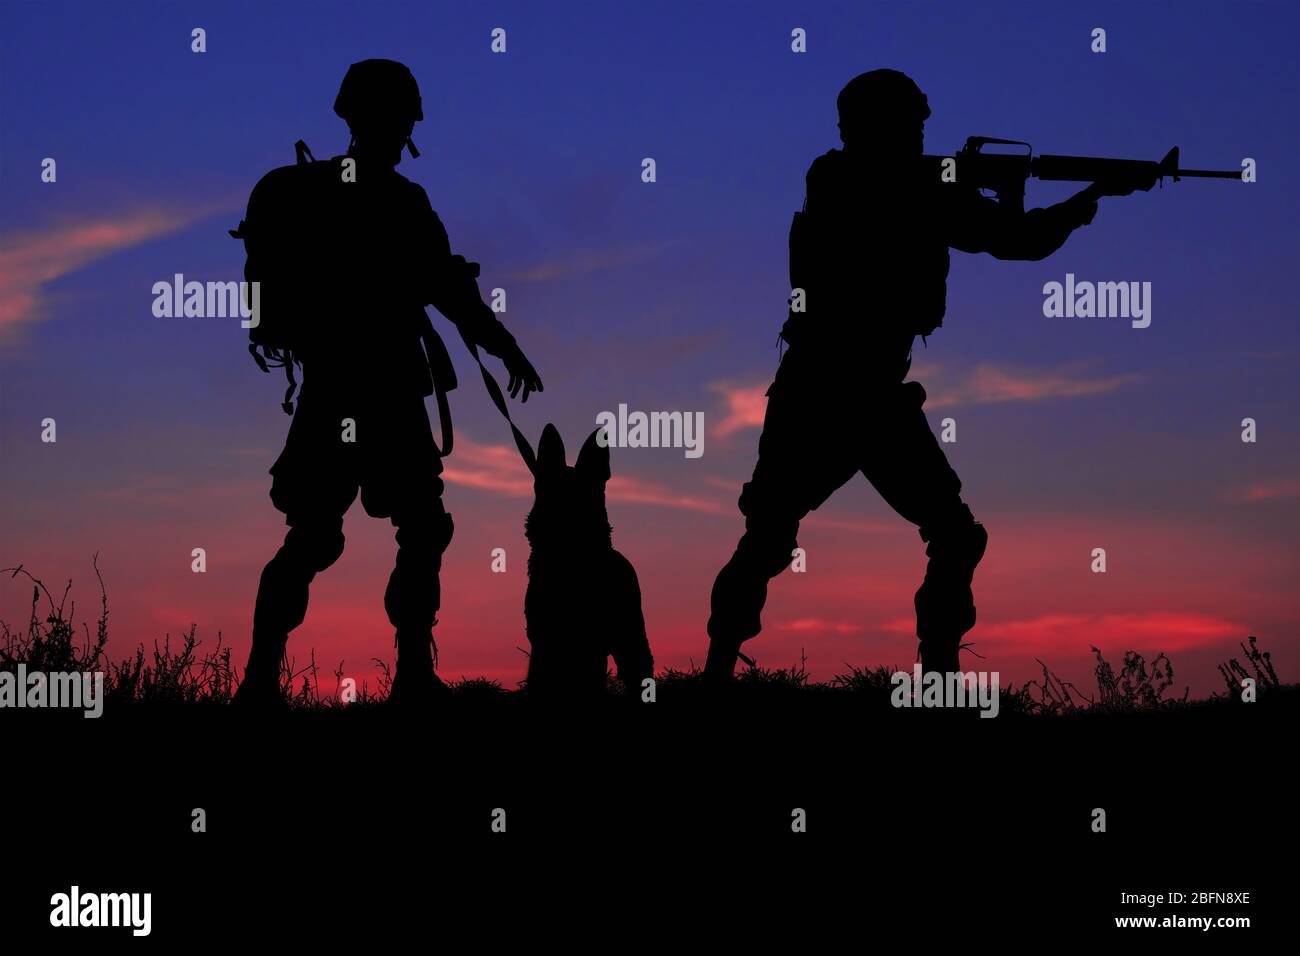 Silhouettes of soldiers and dog on sunset background. Military service concept. Stock Photo